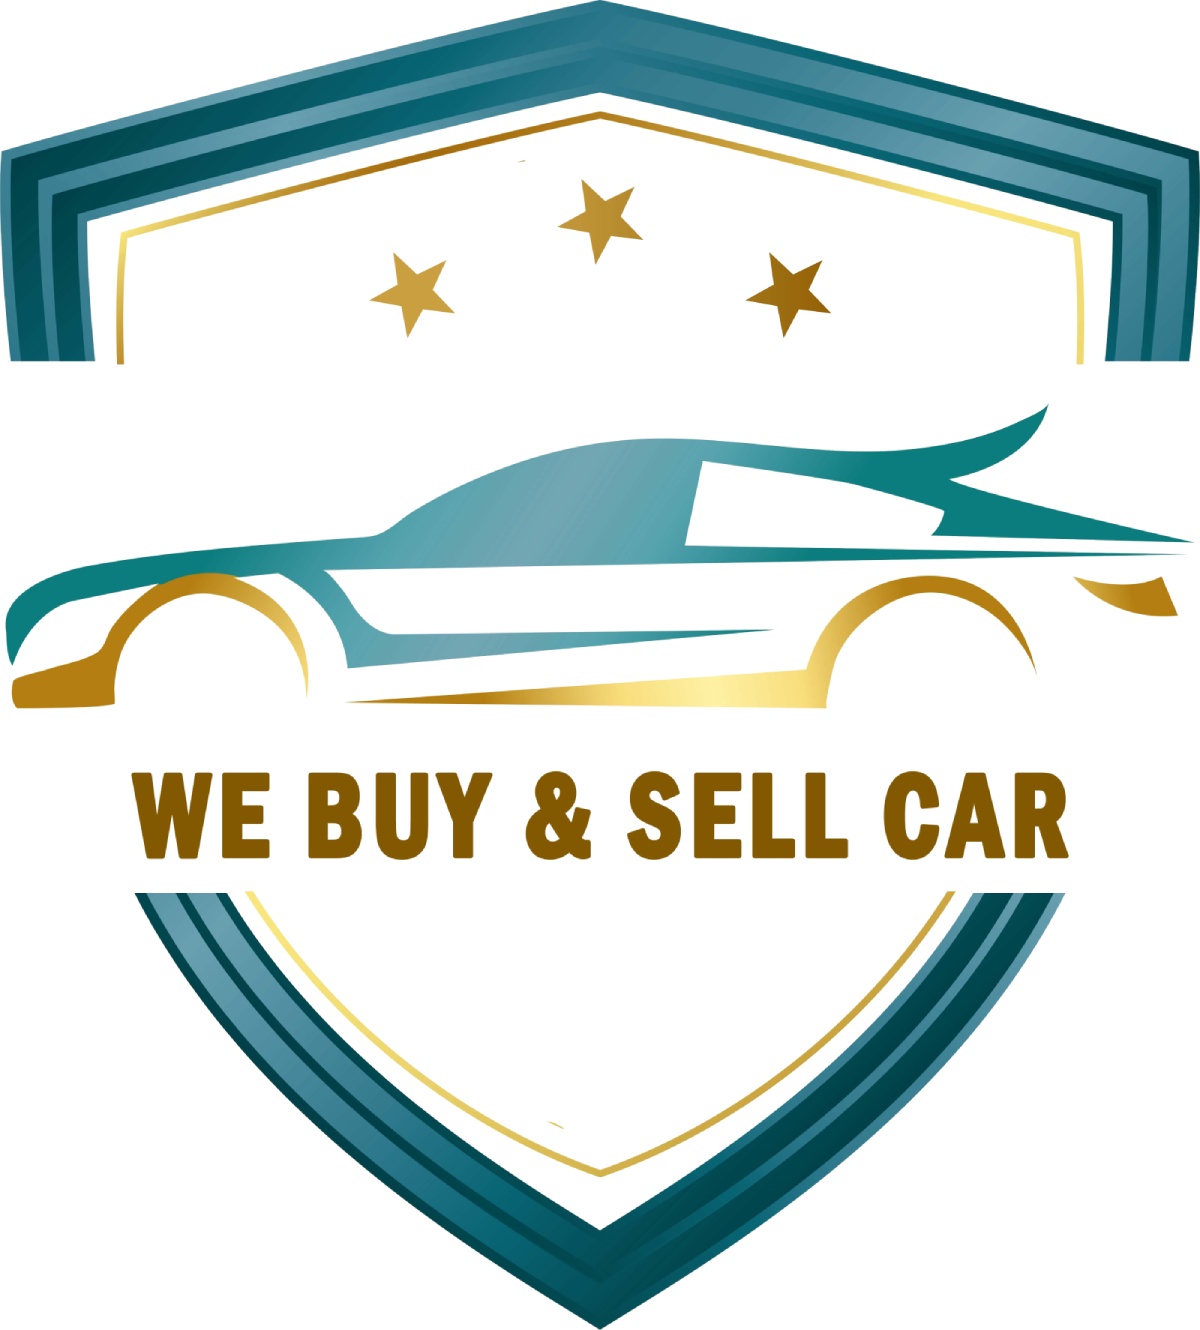 We Buy and Sell Car Inspection and Assessment LLC